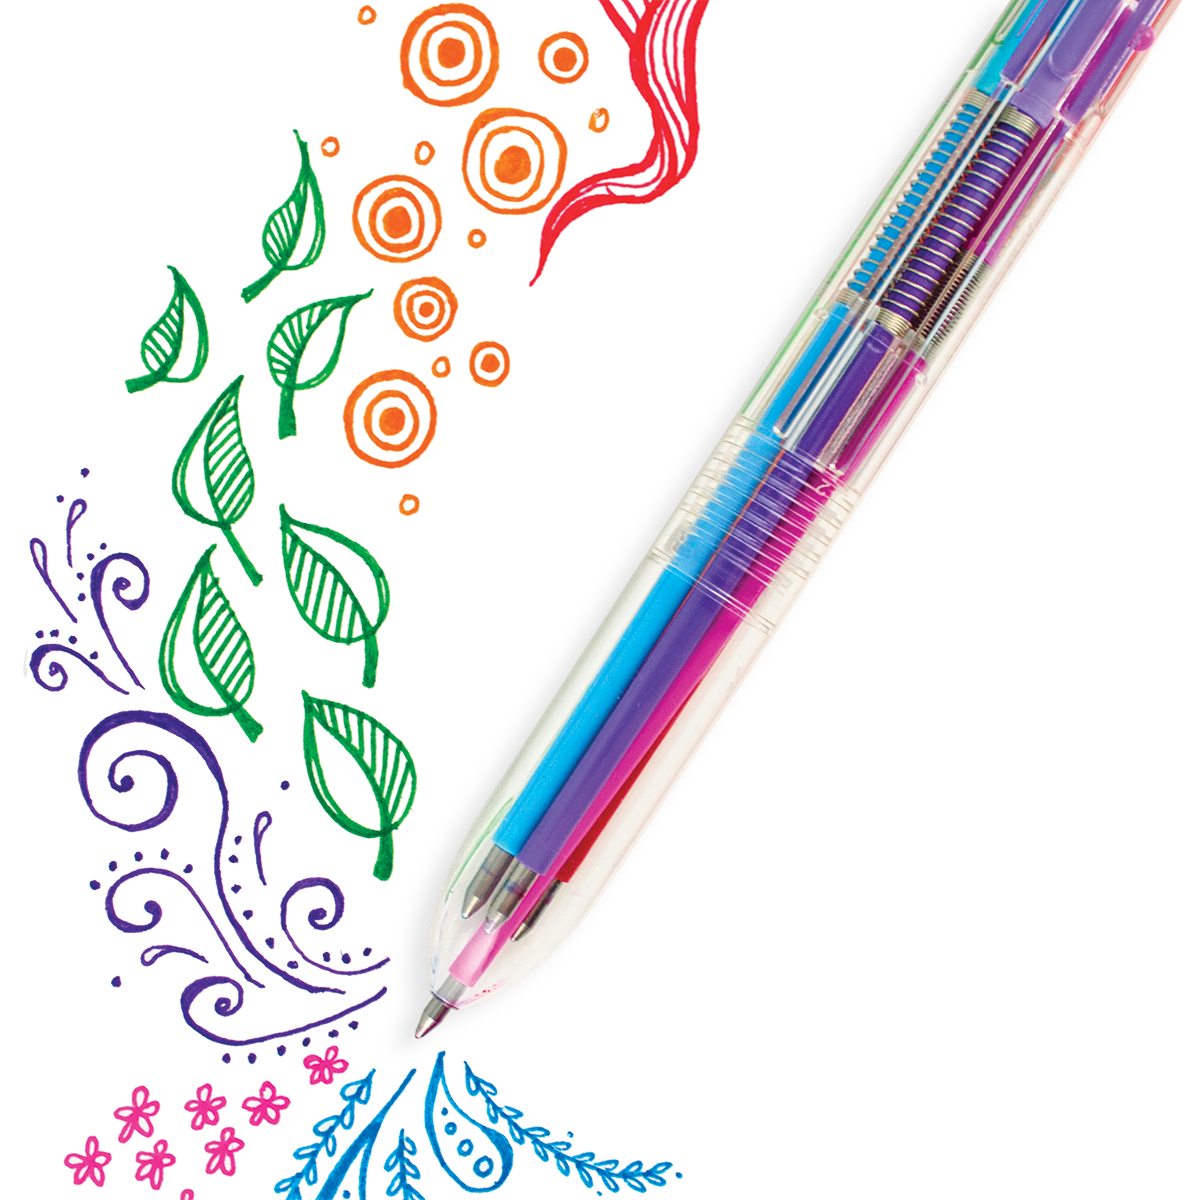 6 Click Gel Pen with artistic freehand designs